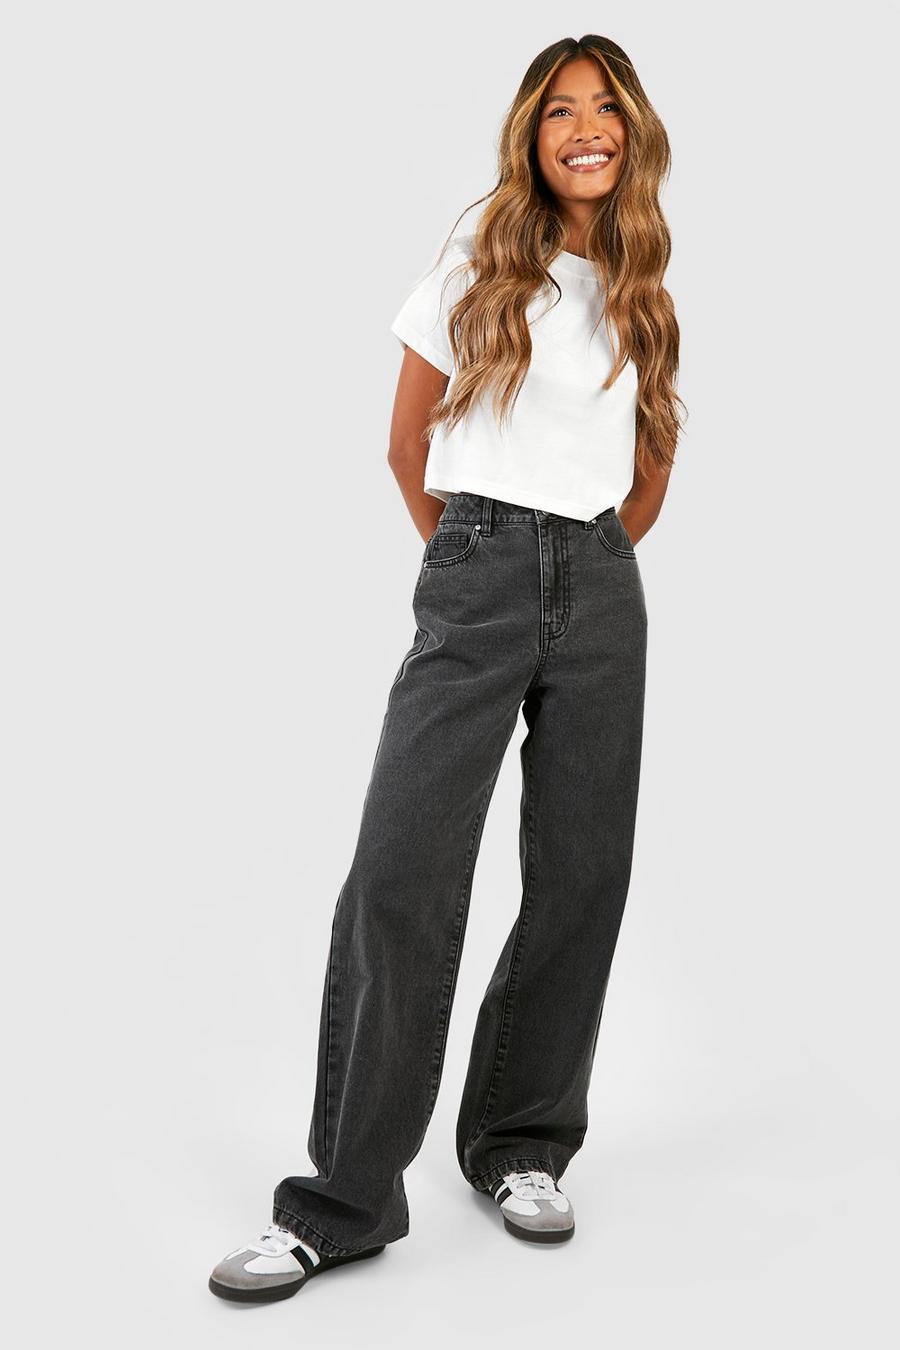 Women's High Rise Jeans